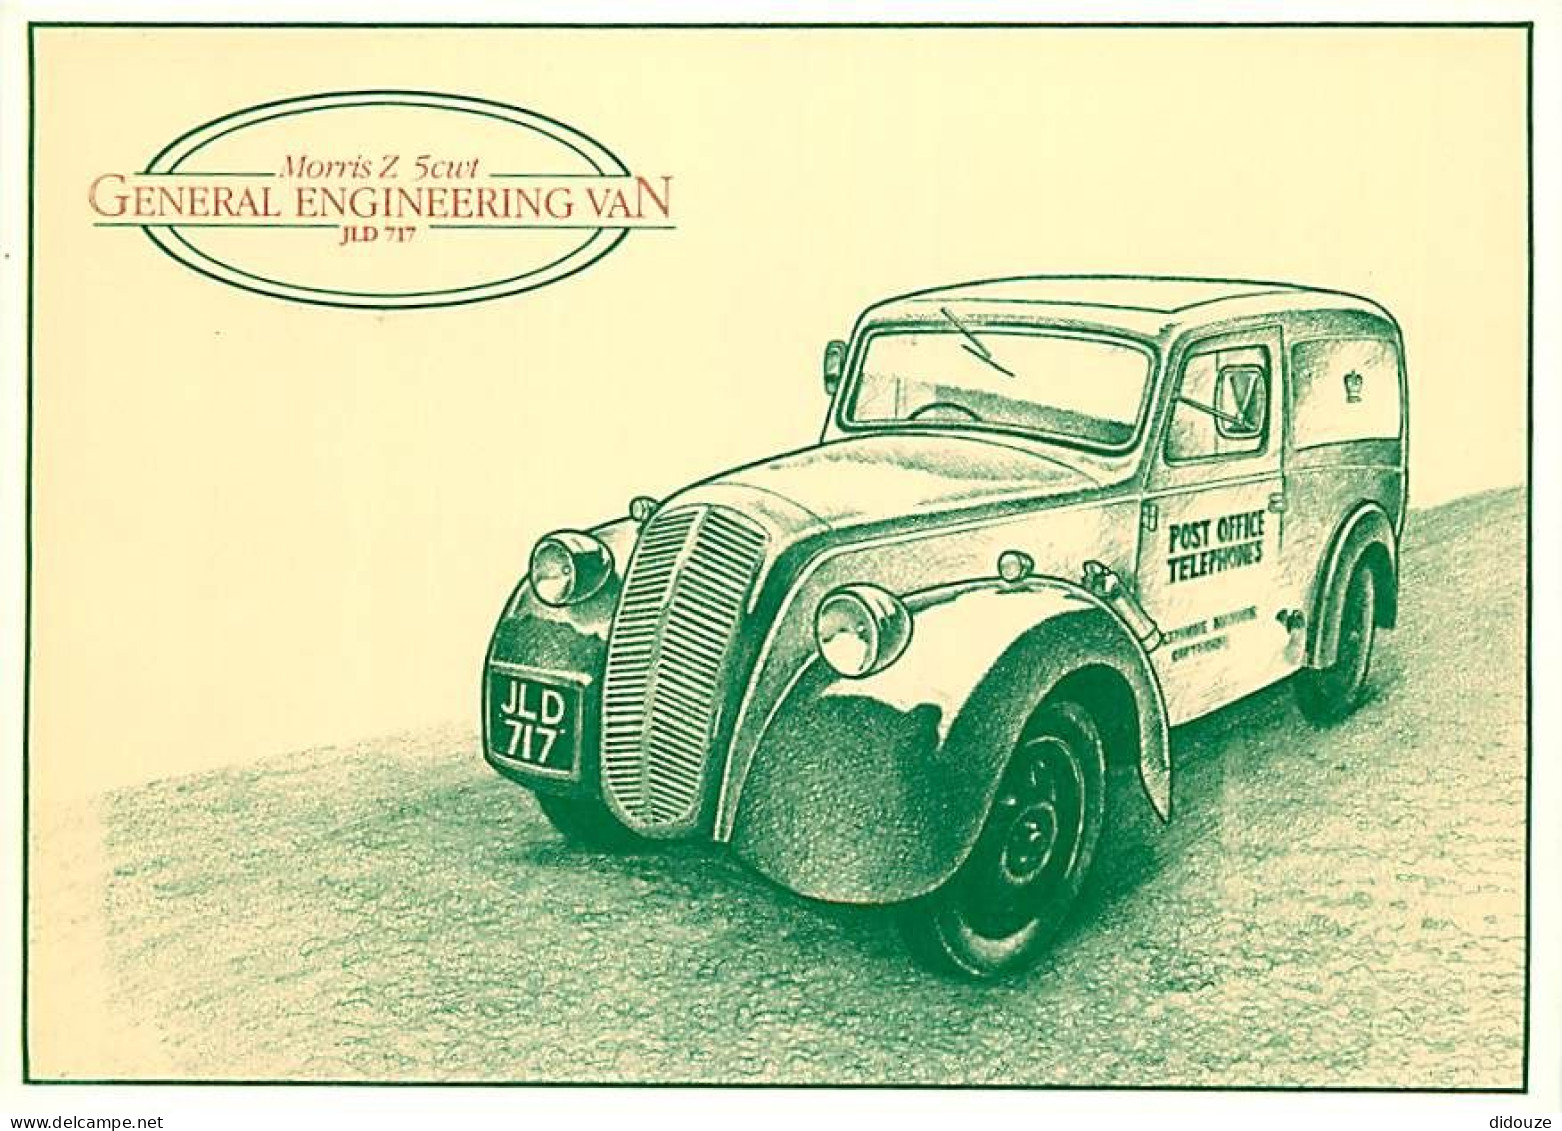 Automobiles - Vehicle Séries No. 4 - The Morris Z Is One Of The Vehicles In The British Telecom - Art Dessin - Carte Neu - PKW